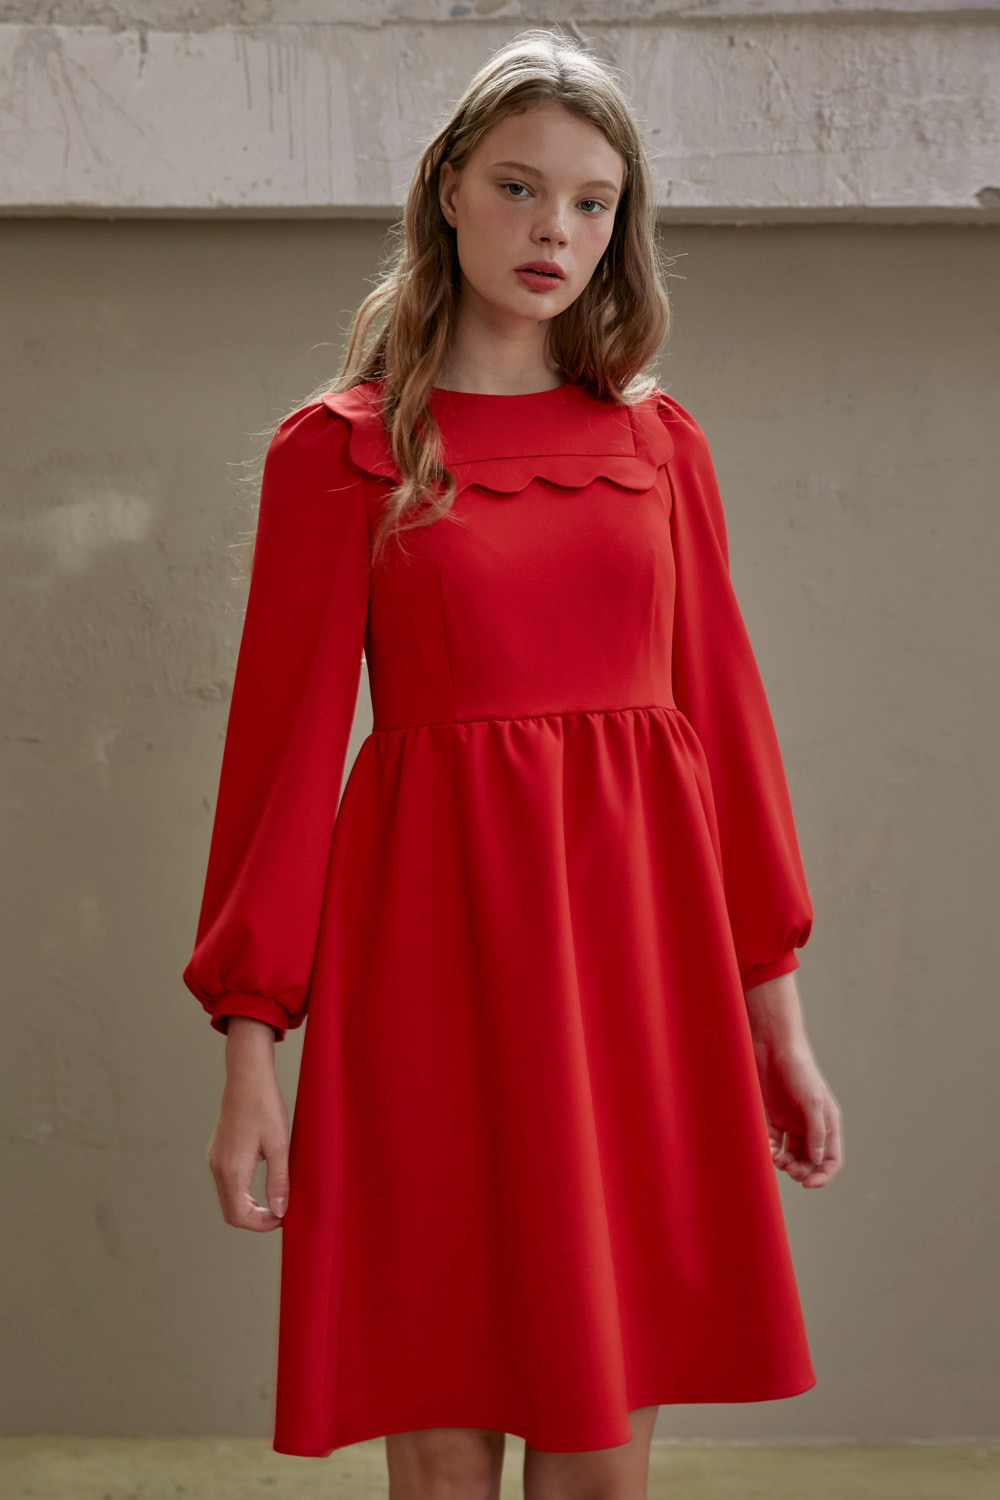 Scallop detail red dress